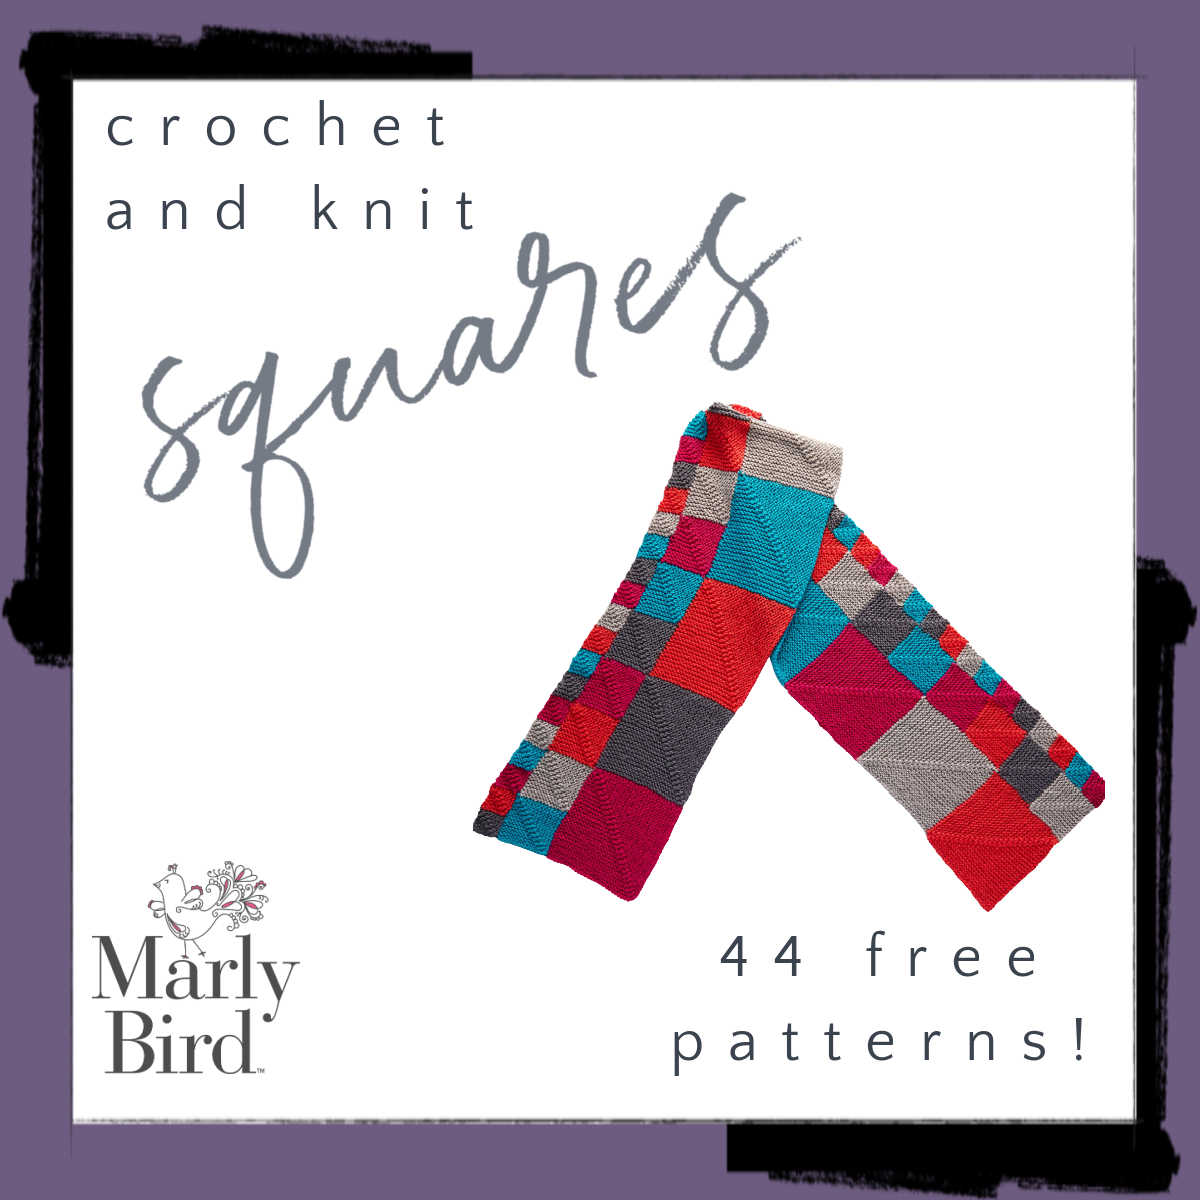 44 Free Crochet and Knit Squares Projects - Marly Bird